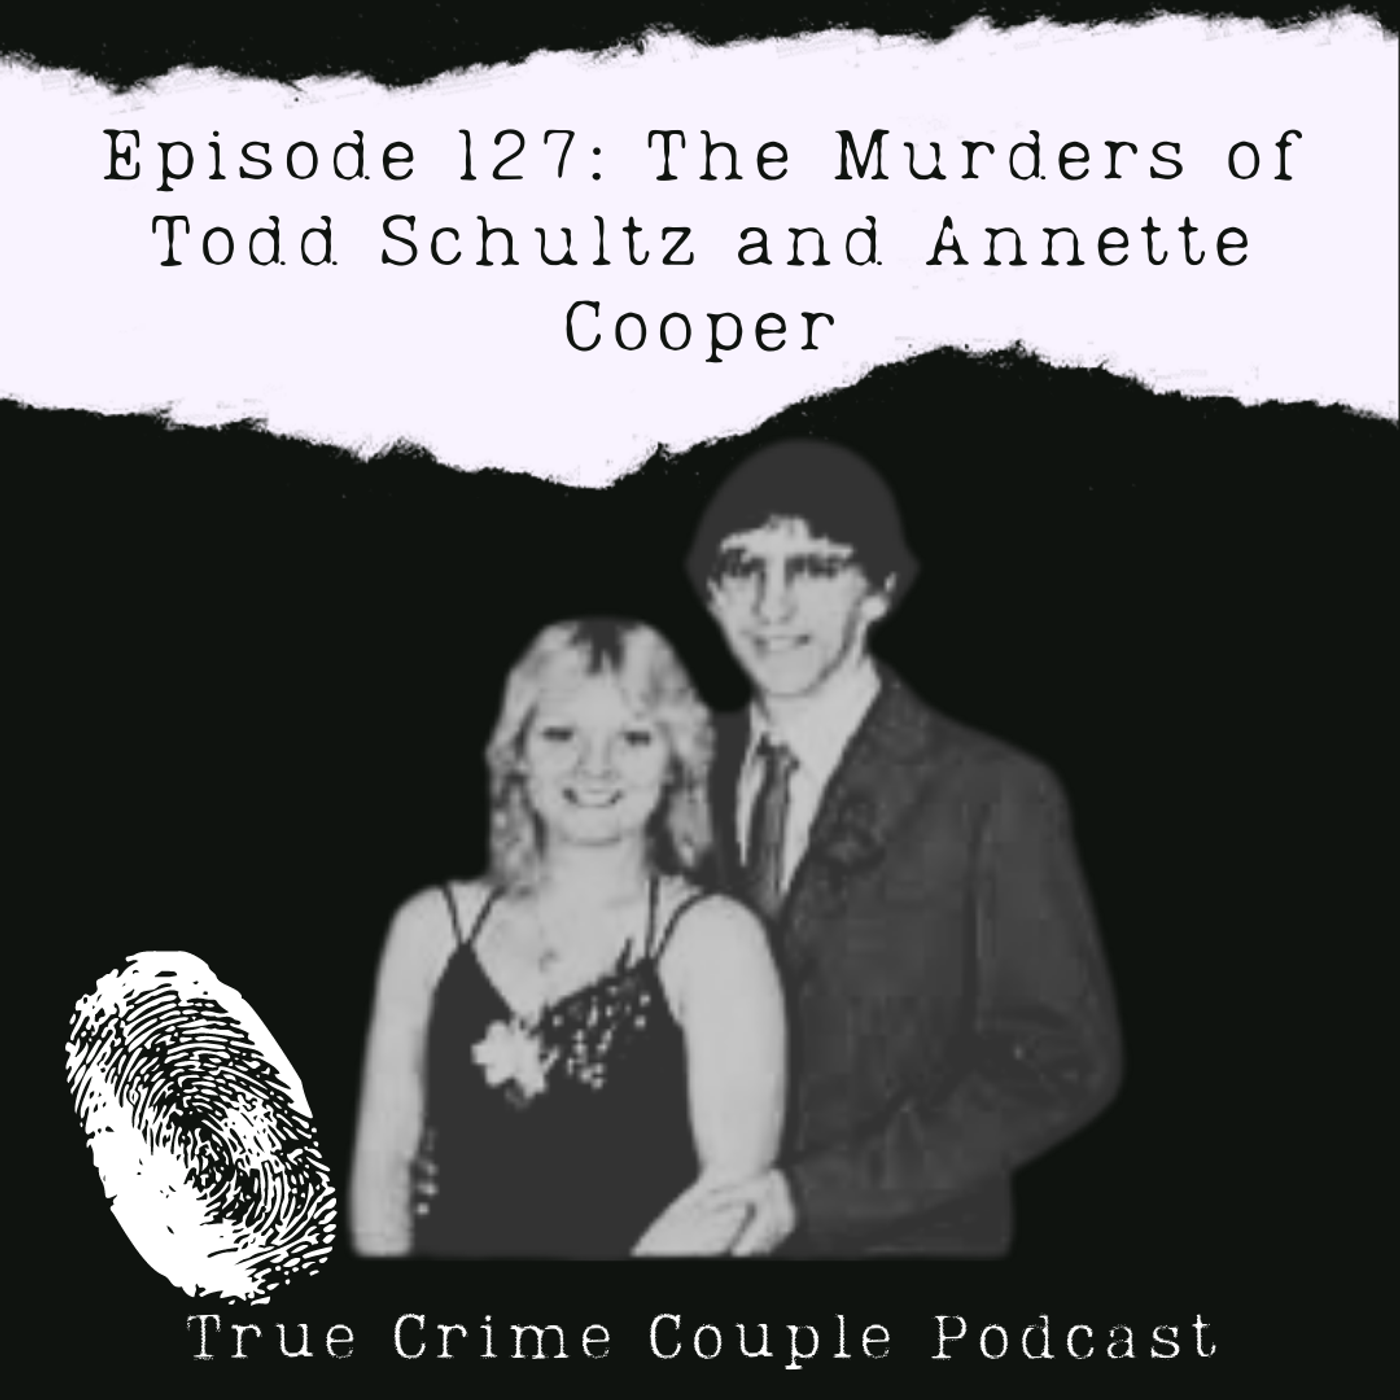 Episode 127: The Murders of Todd Schultz and Annette Cooper